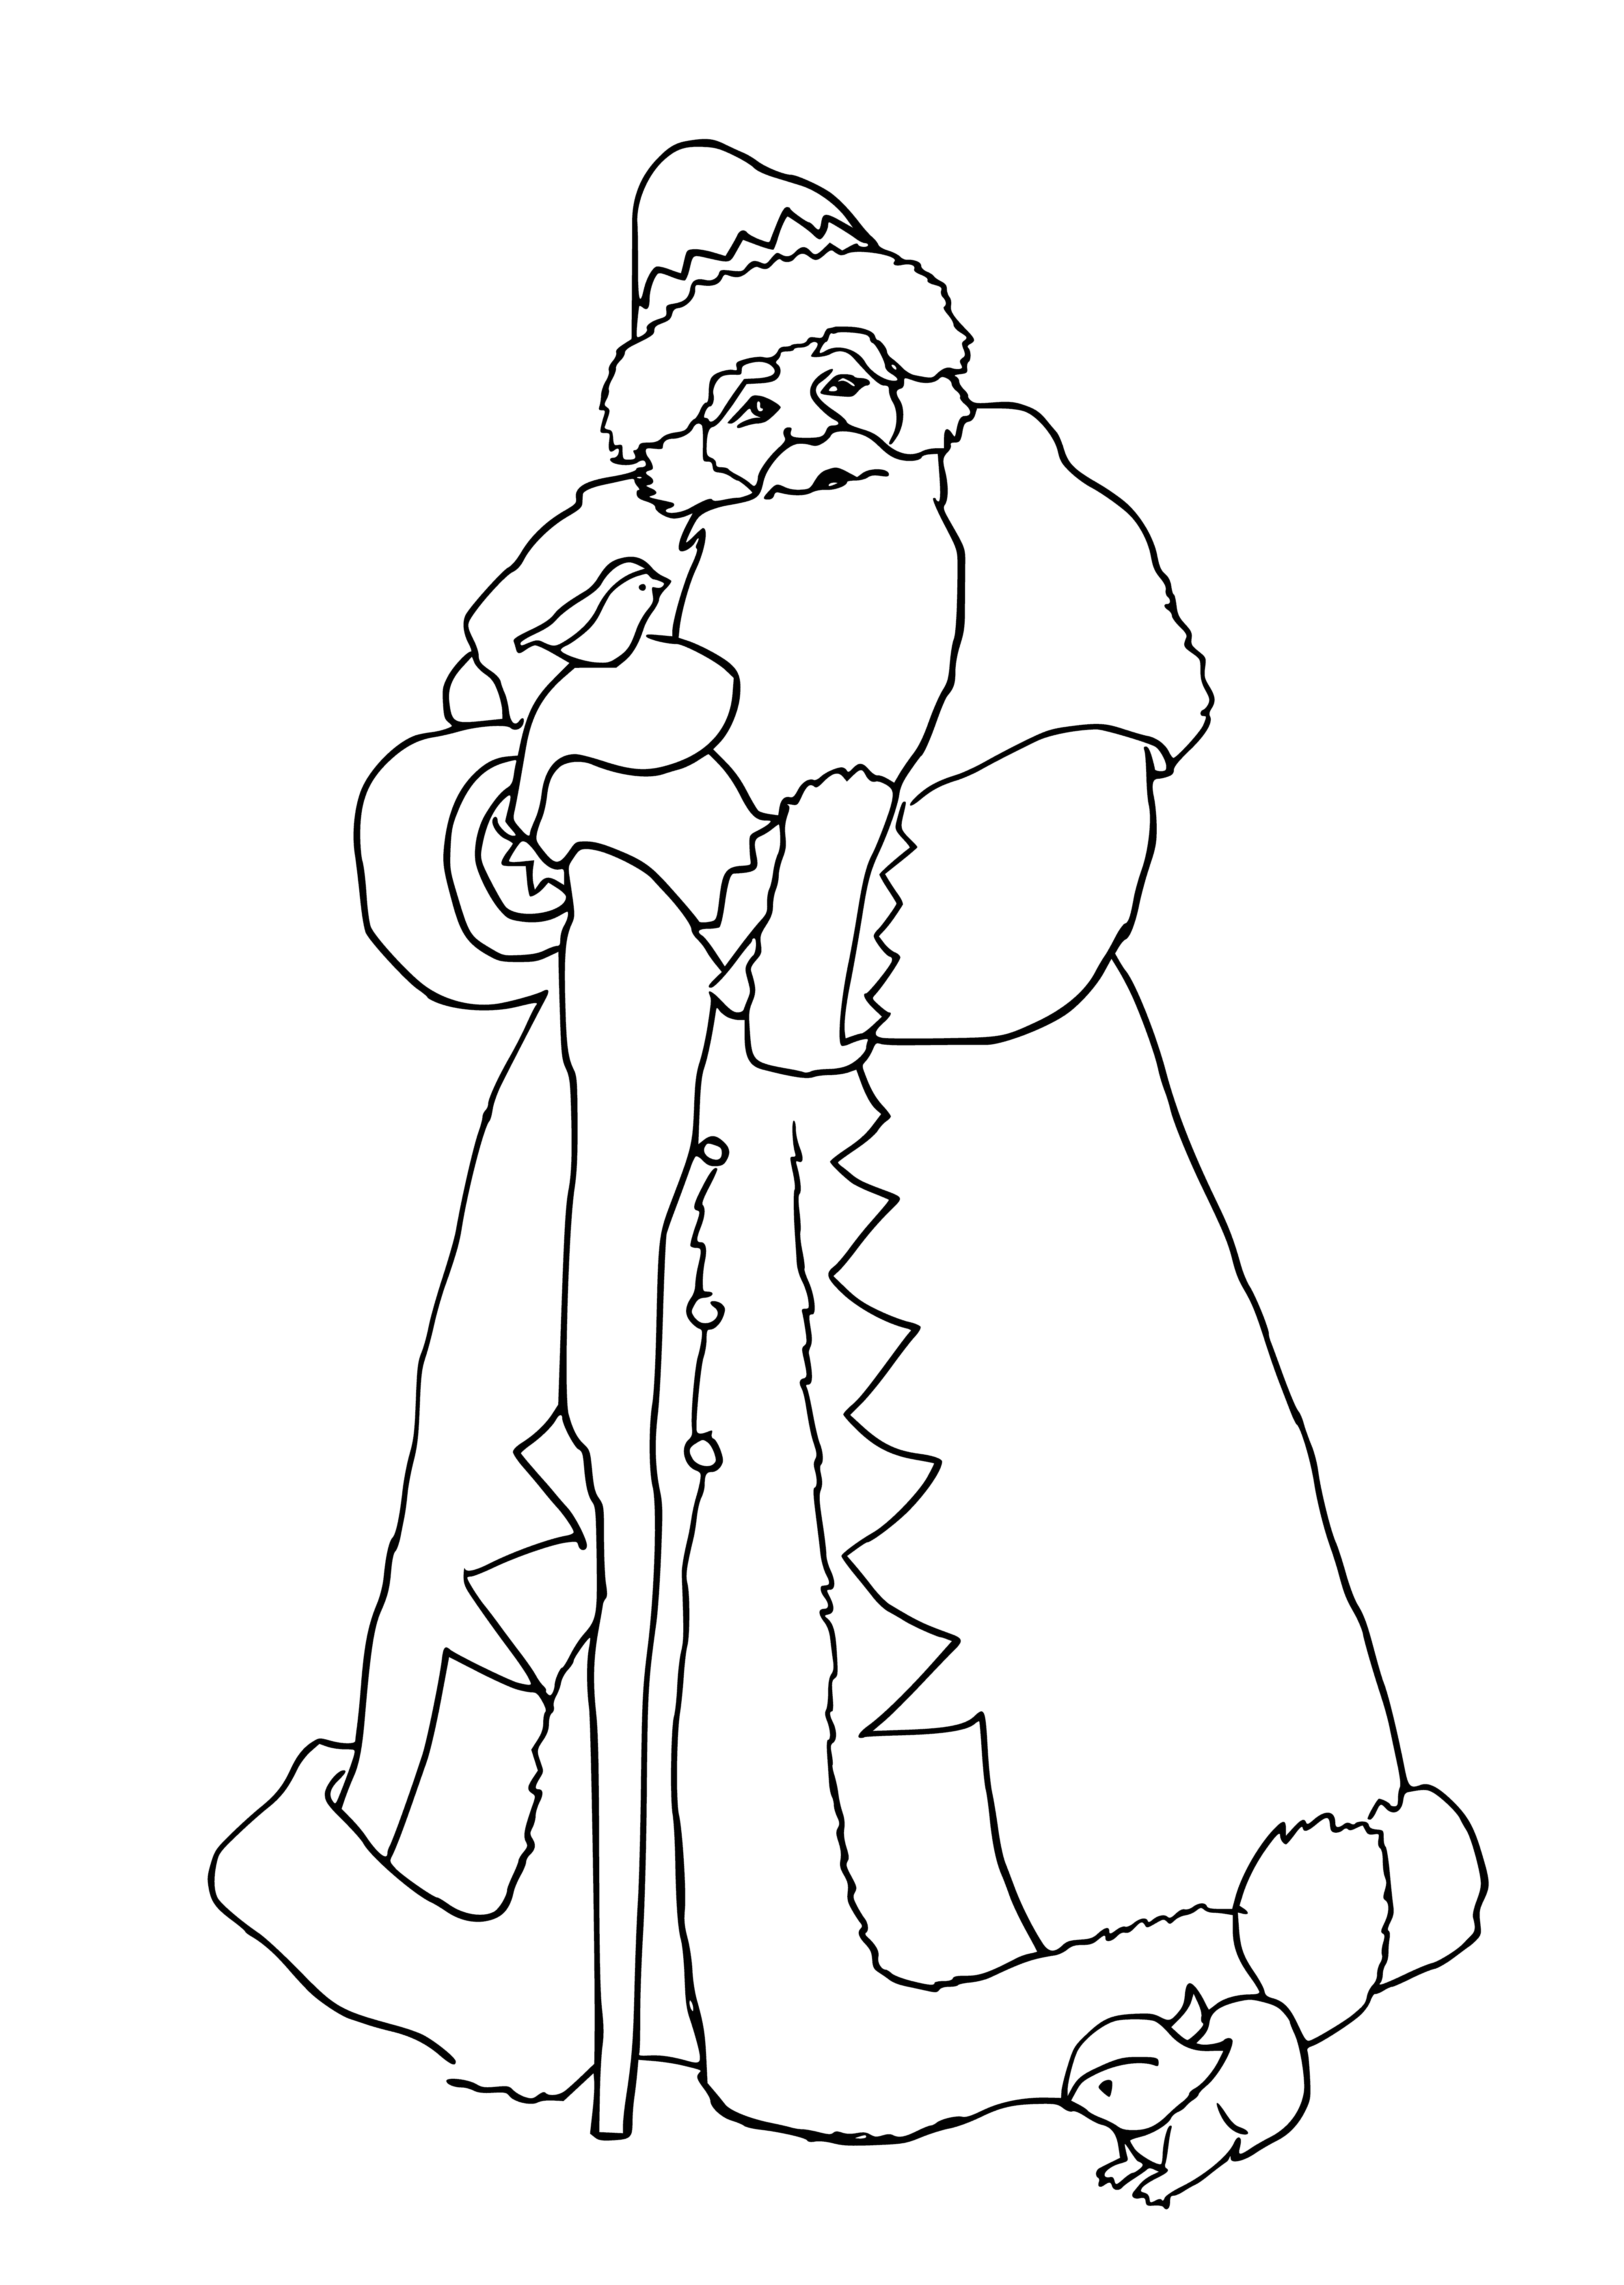 Santa Clause holding presents and candy cane, ready for Christmas giving!